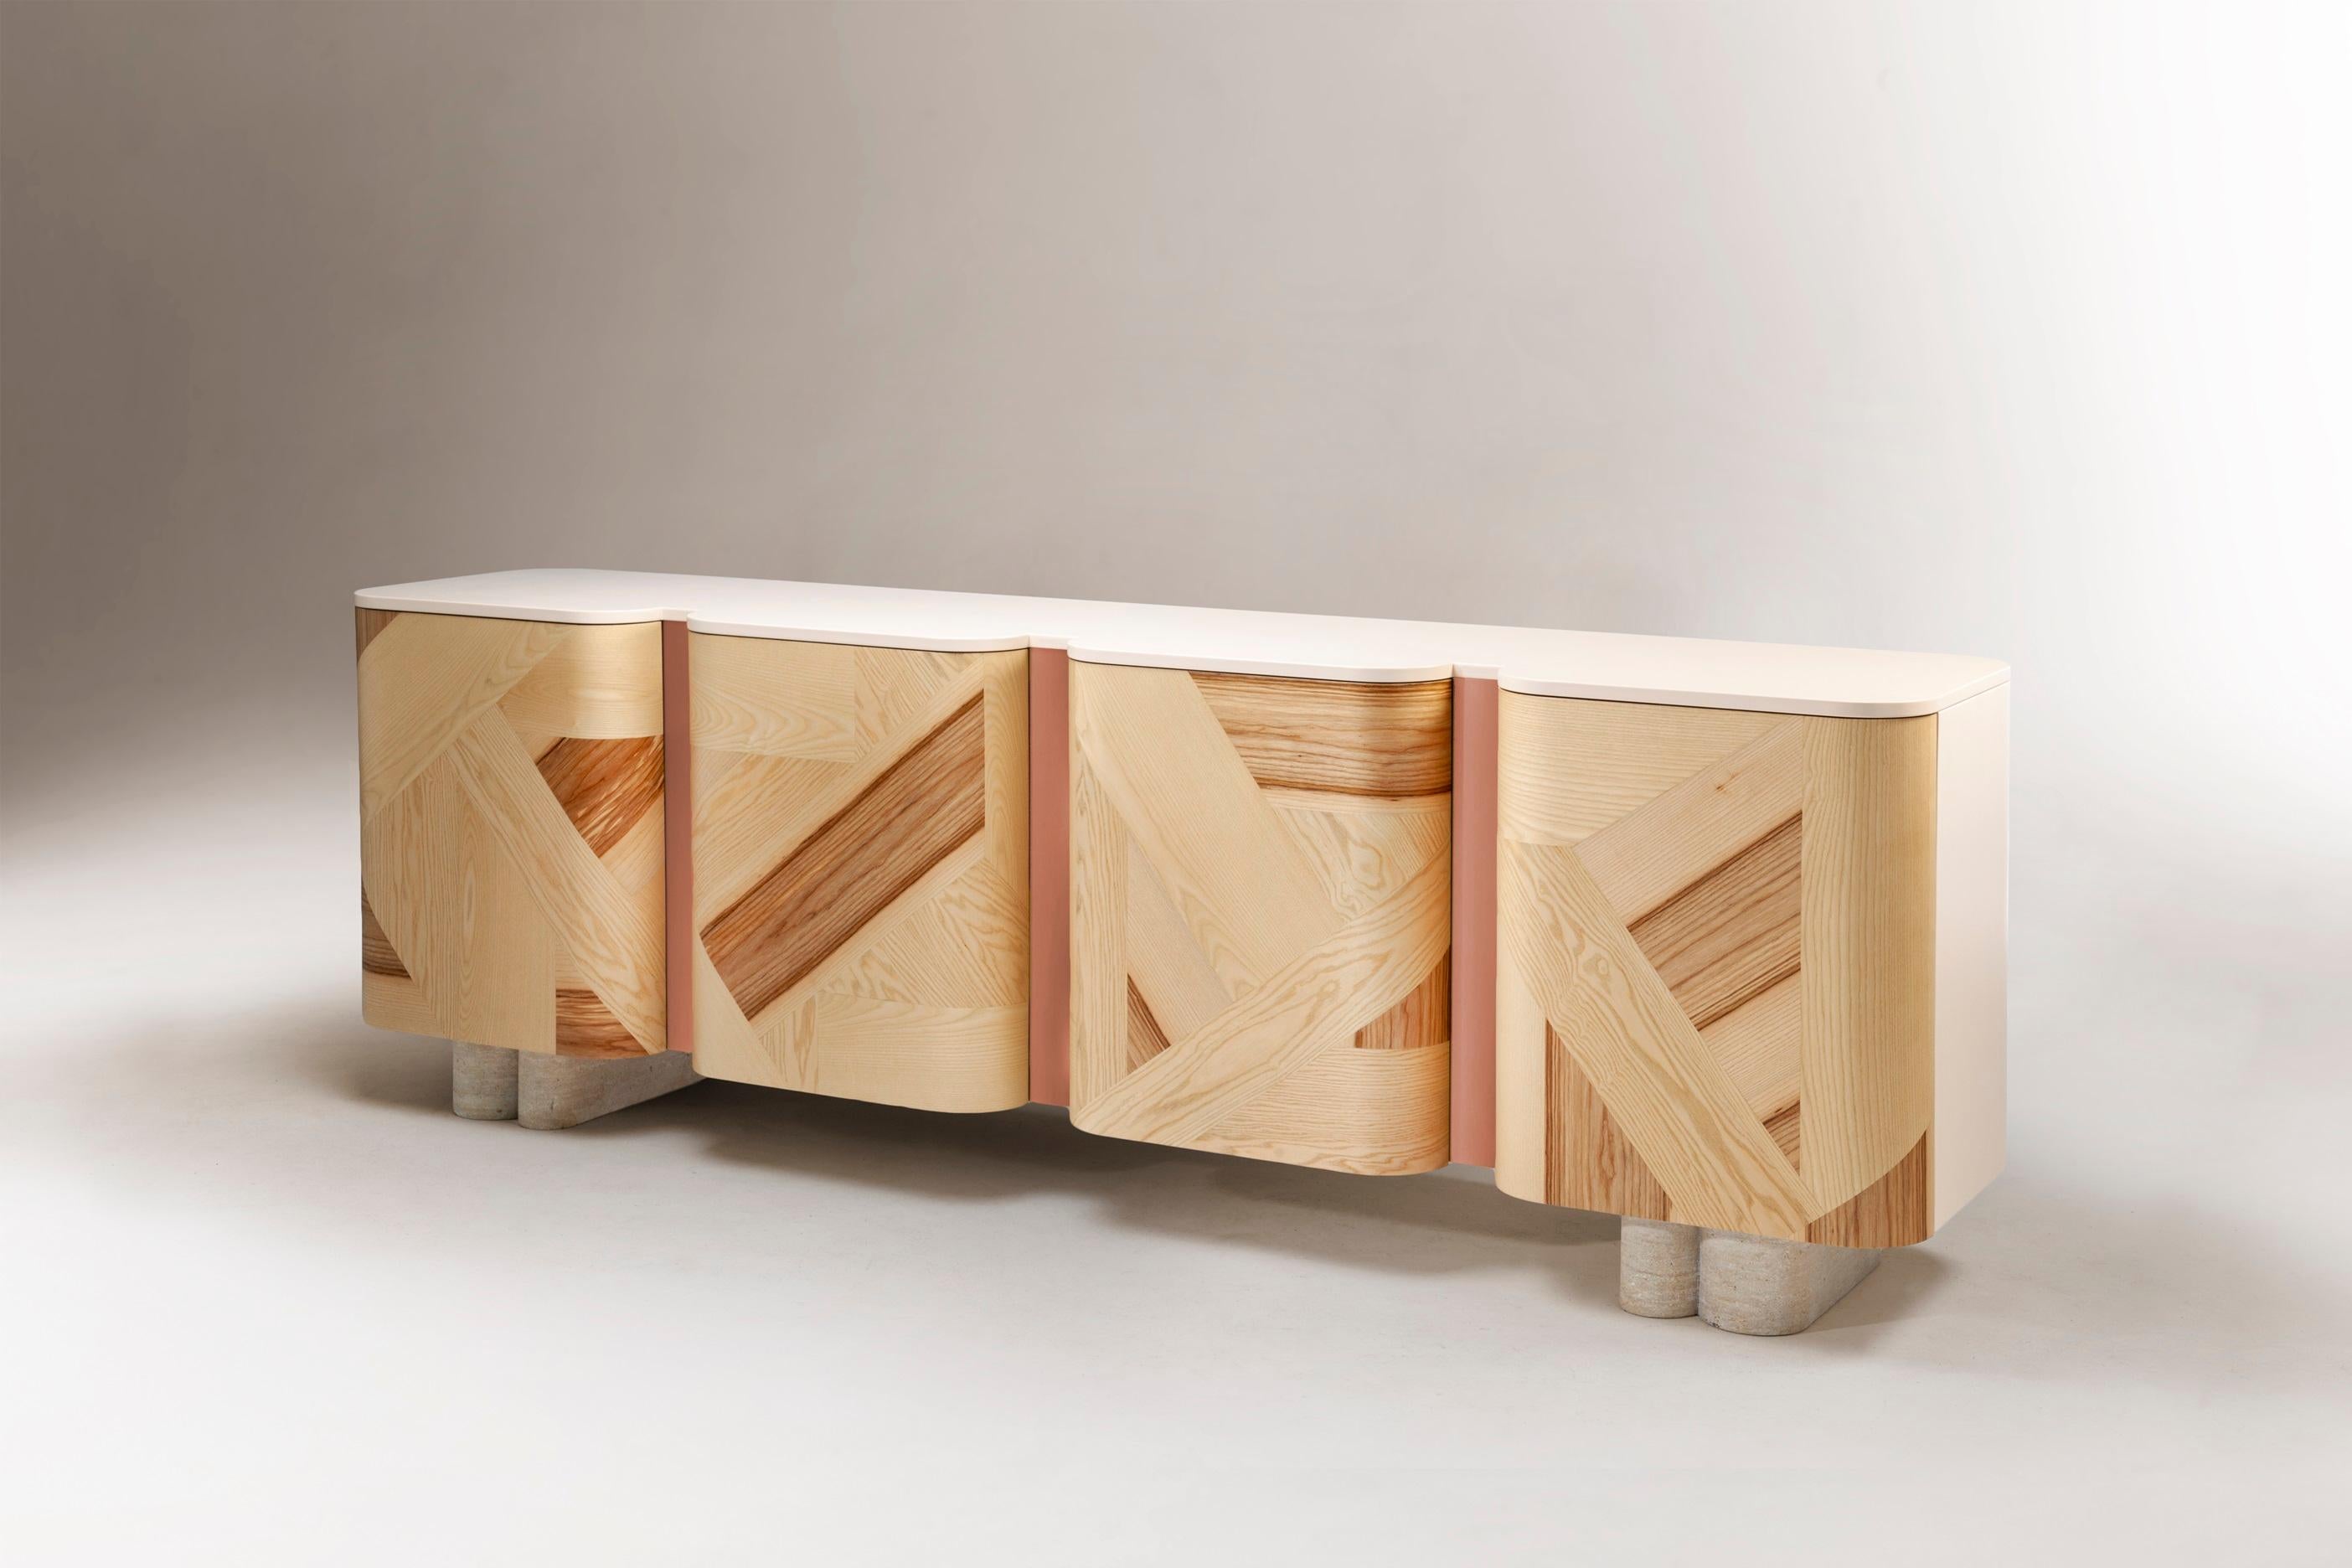 Embodying a meeting point of western and eastern aesthetics, Kisho Sideboard combines a rich mix of refined artistic techniques, organic shapes, natural colors and textures showing evidence of the visually inspiring movement of Japanese Modernism,